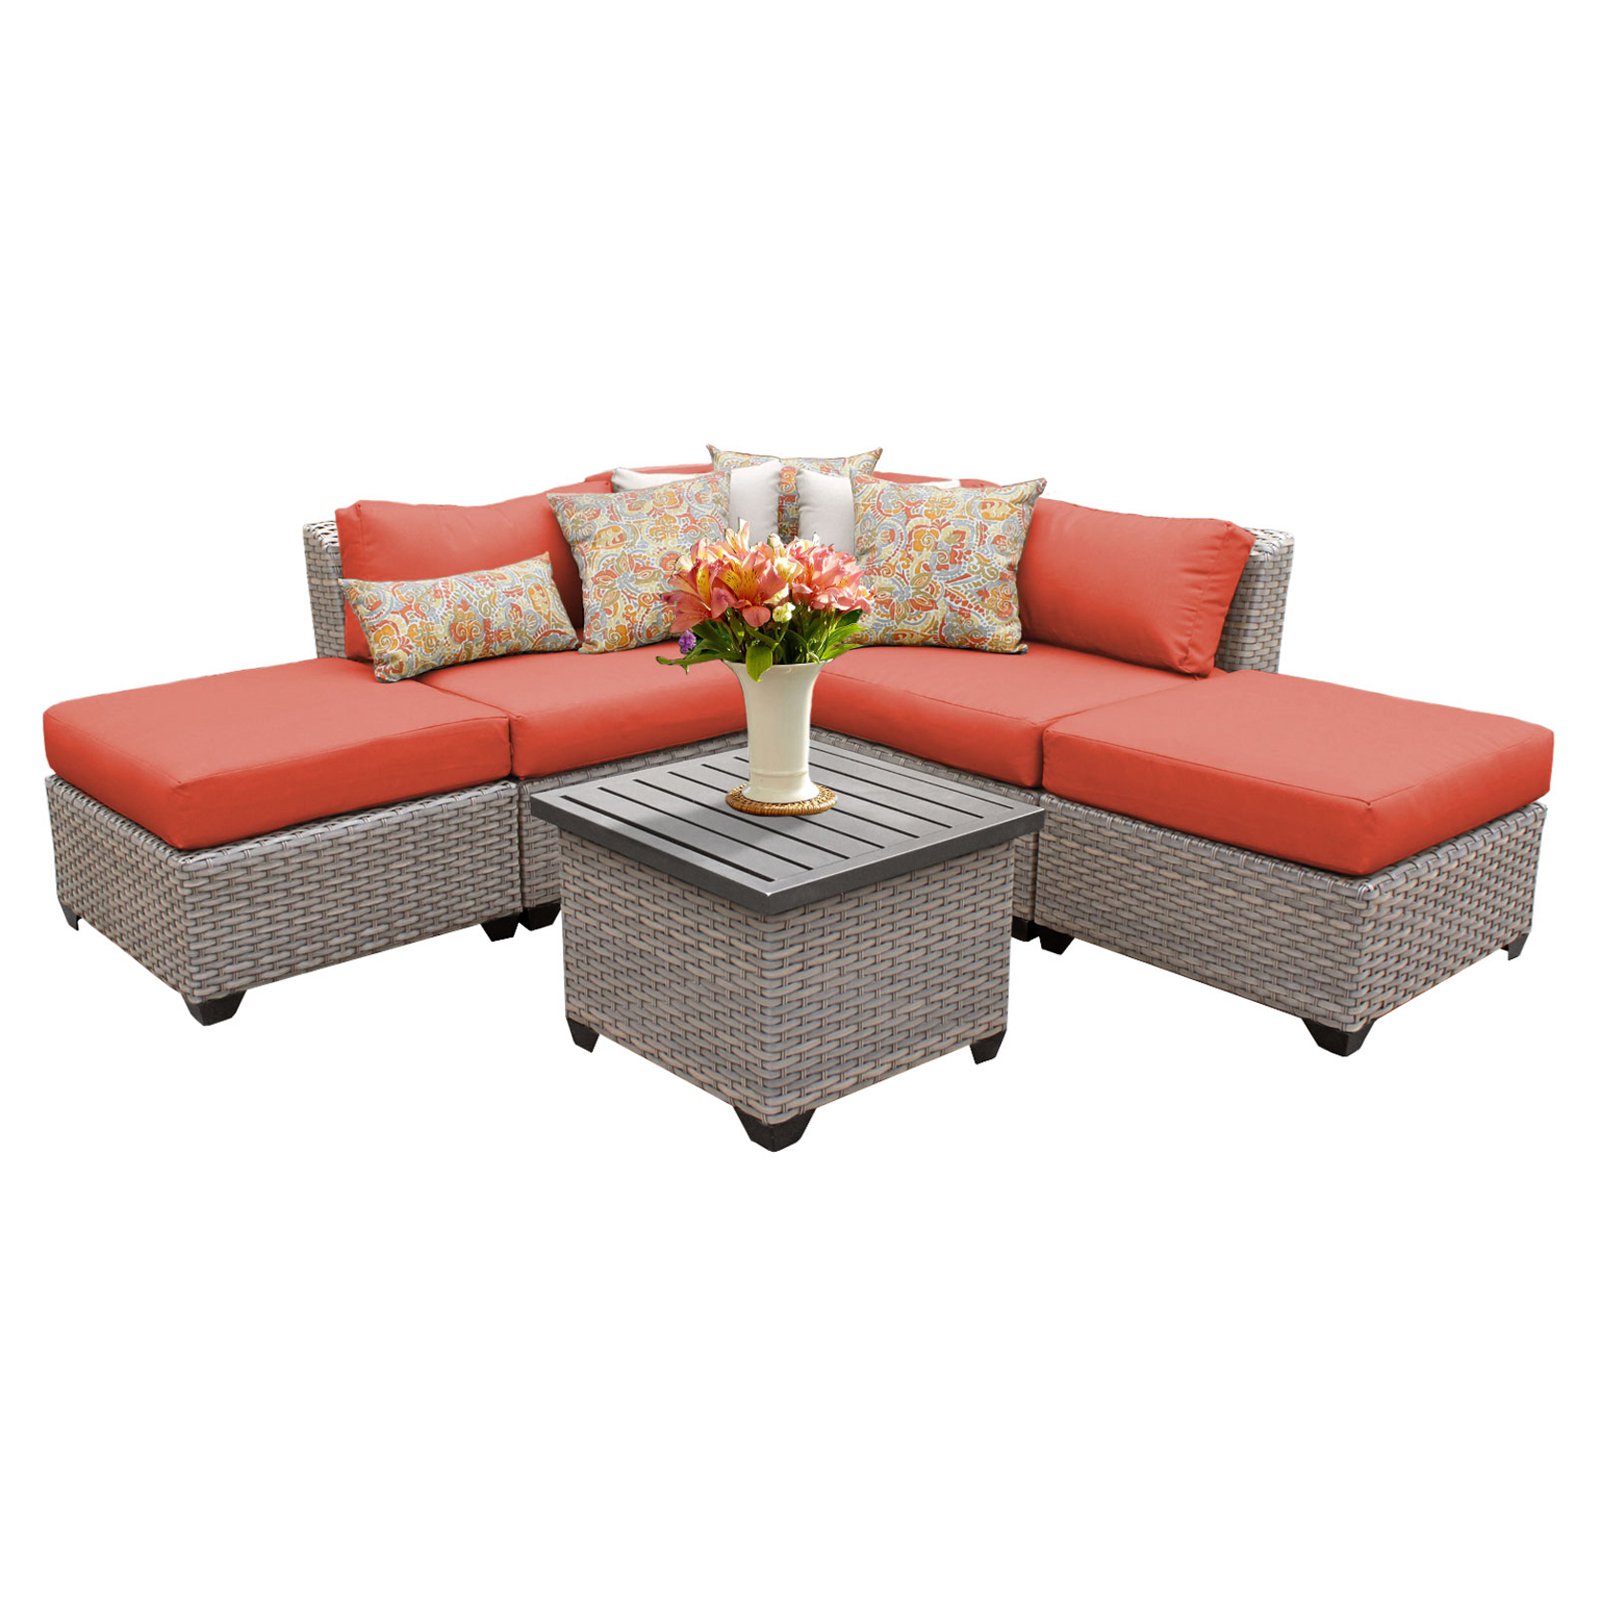 TK Classics Florence Wicker 6 Piece Patio Conversation Set with 2 Sets of Cushion Covers - image 1 of 2